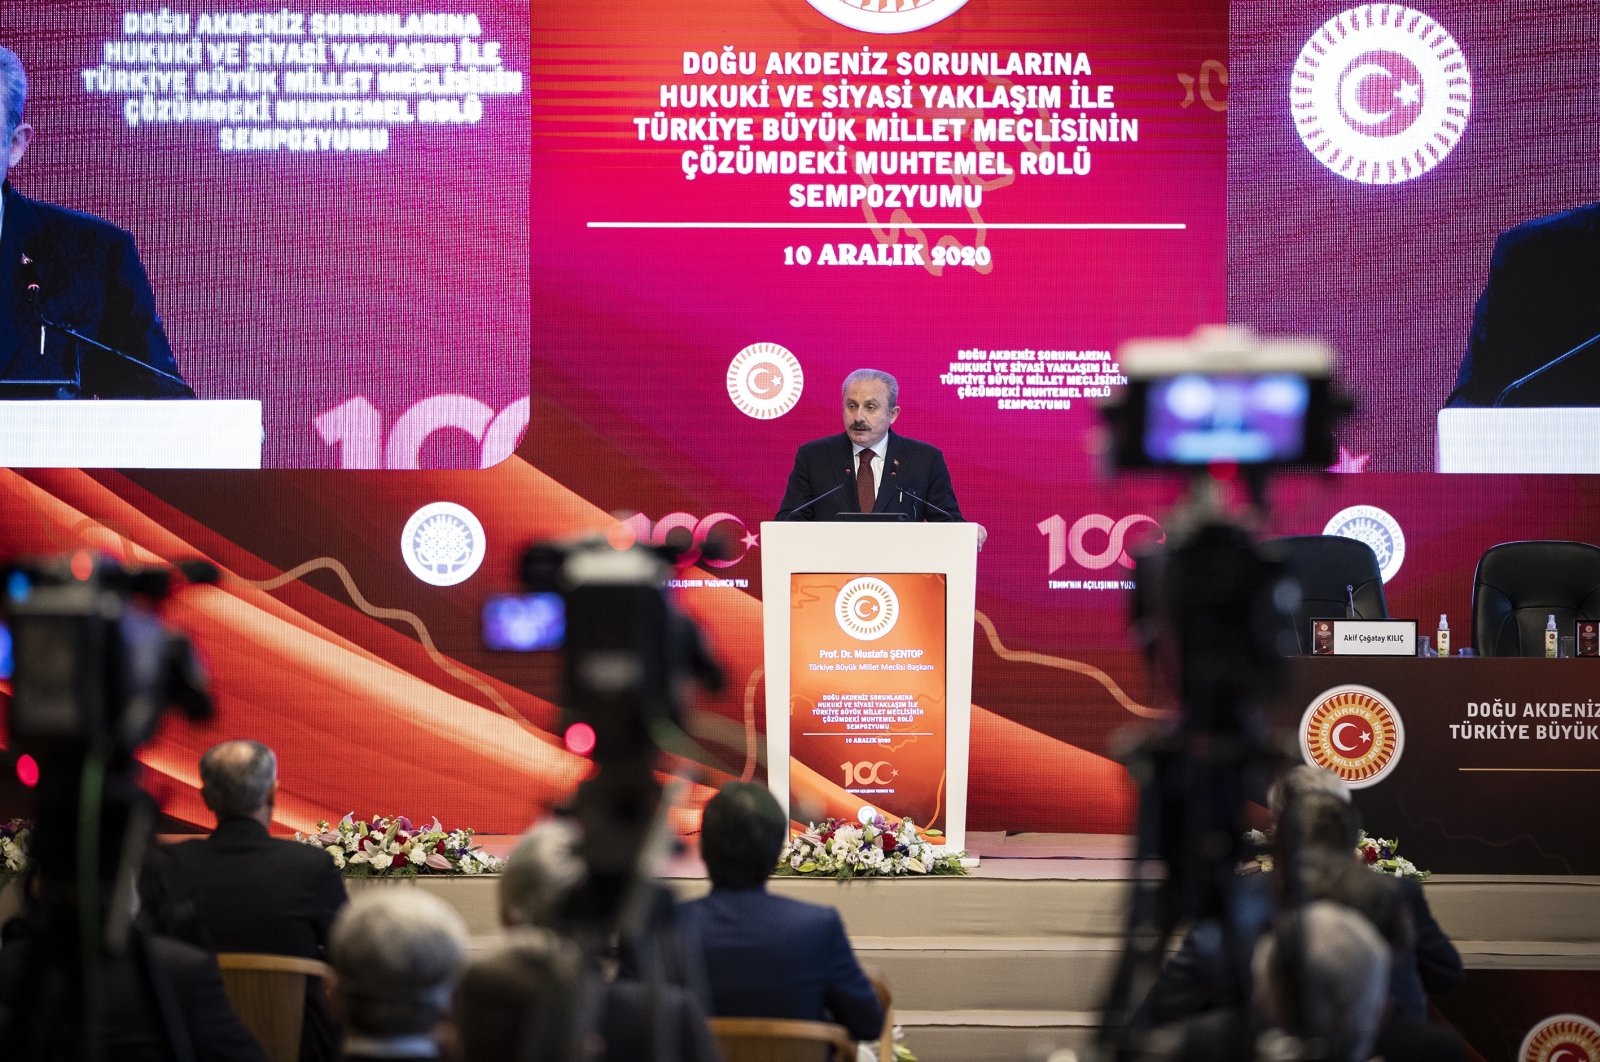 Parliament Speaker Mustafa Şentop speaks at a symposium on the role of Parliament in the solution to the Eastern Mediterranean conflict, Ankara, Turkey, Dec. 10, 2020. (AA Photo)